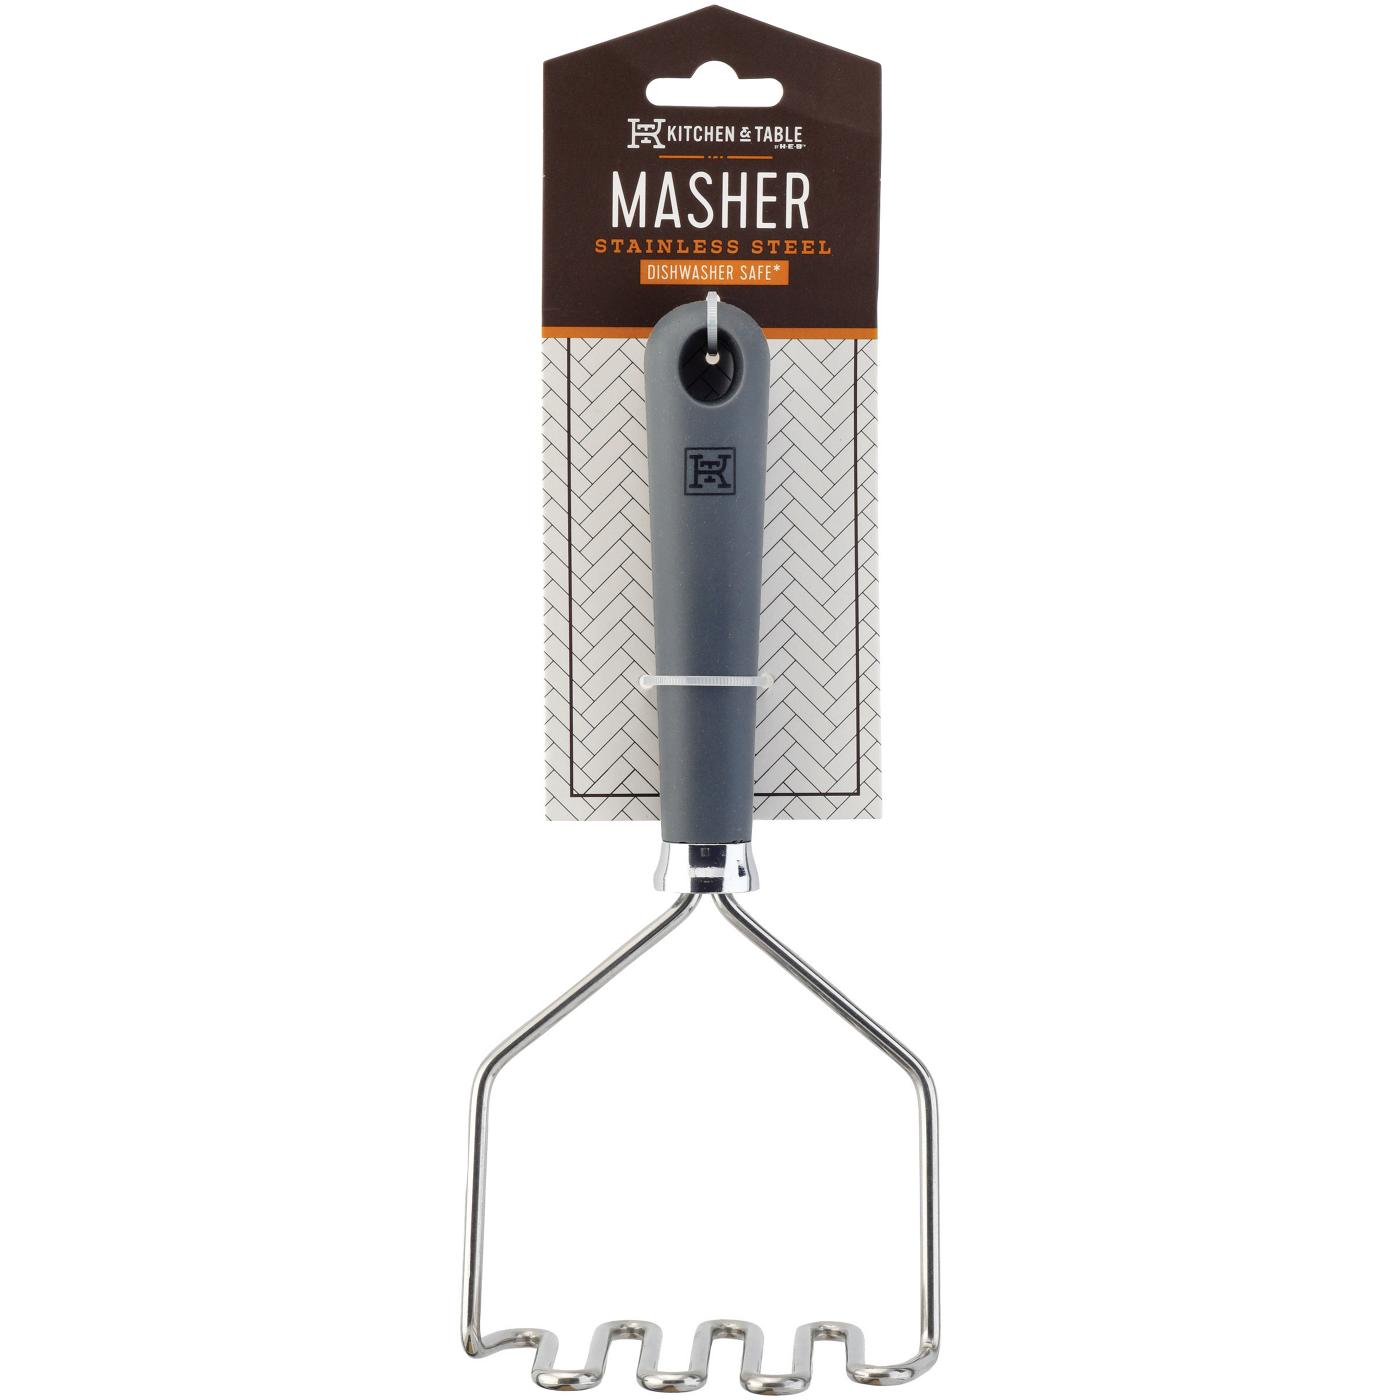 Kitchen & Table by H-E-B Stainless Steel Masher - Shop Utensils & Gadgets  at H-E-B